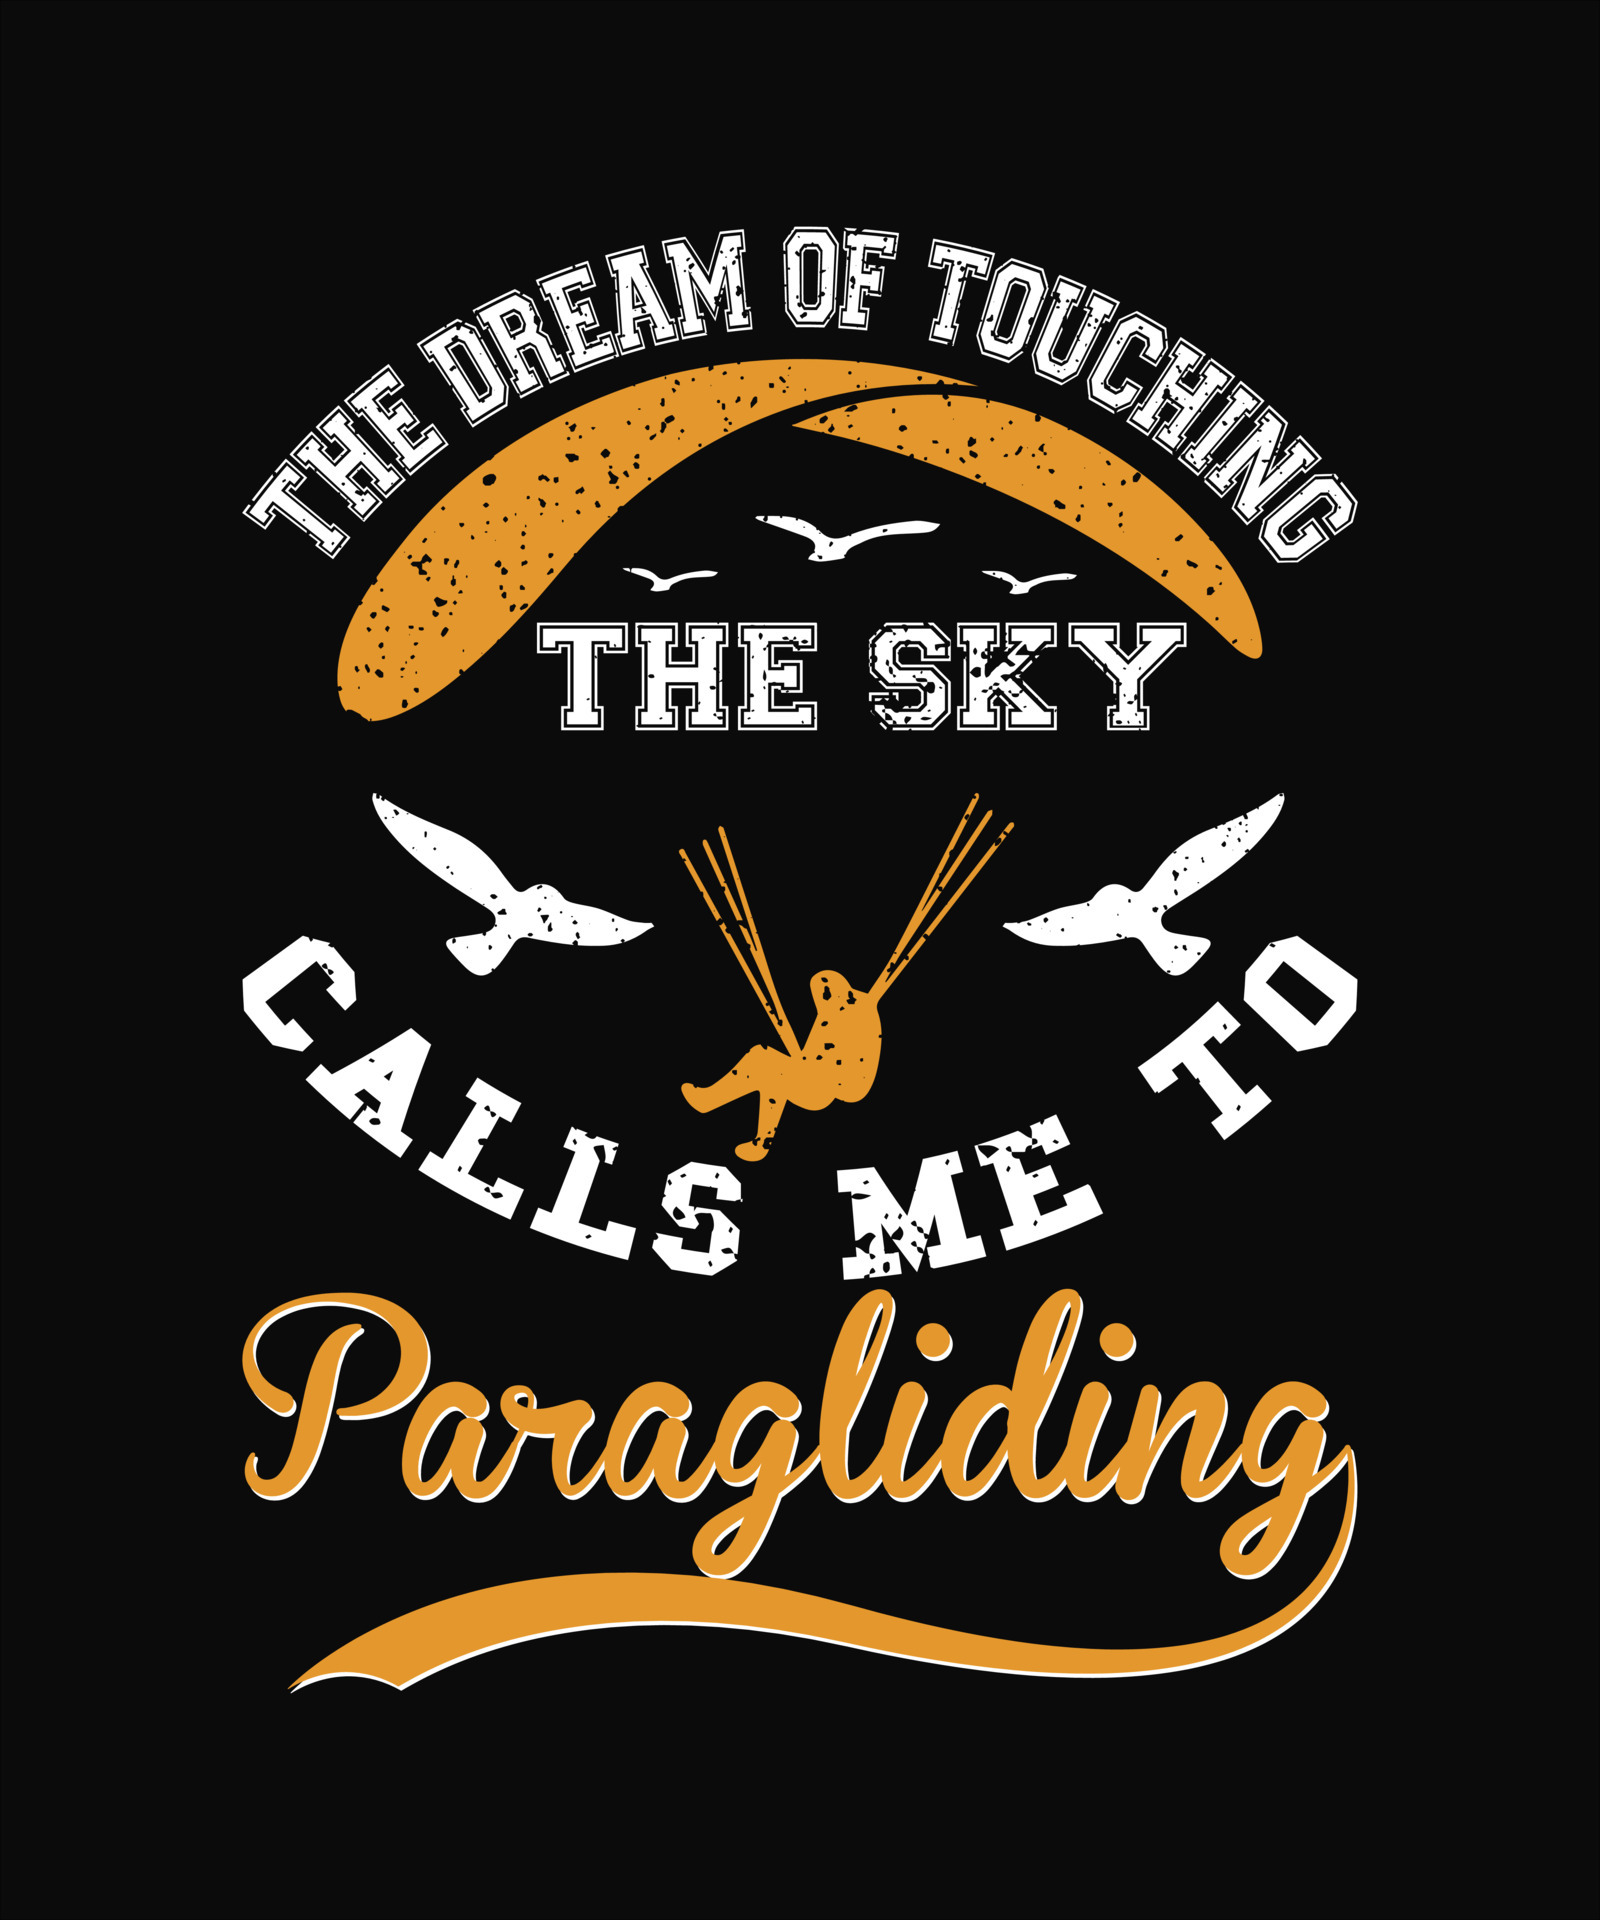 The Dream of Touching the Sky Calls Me to Paragliding T Shirt